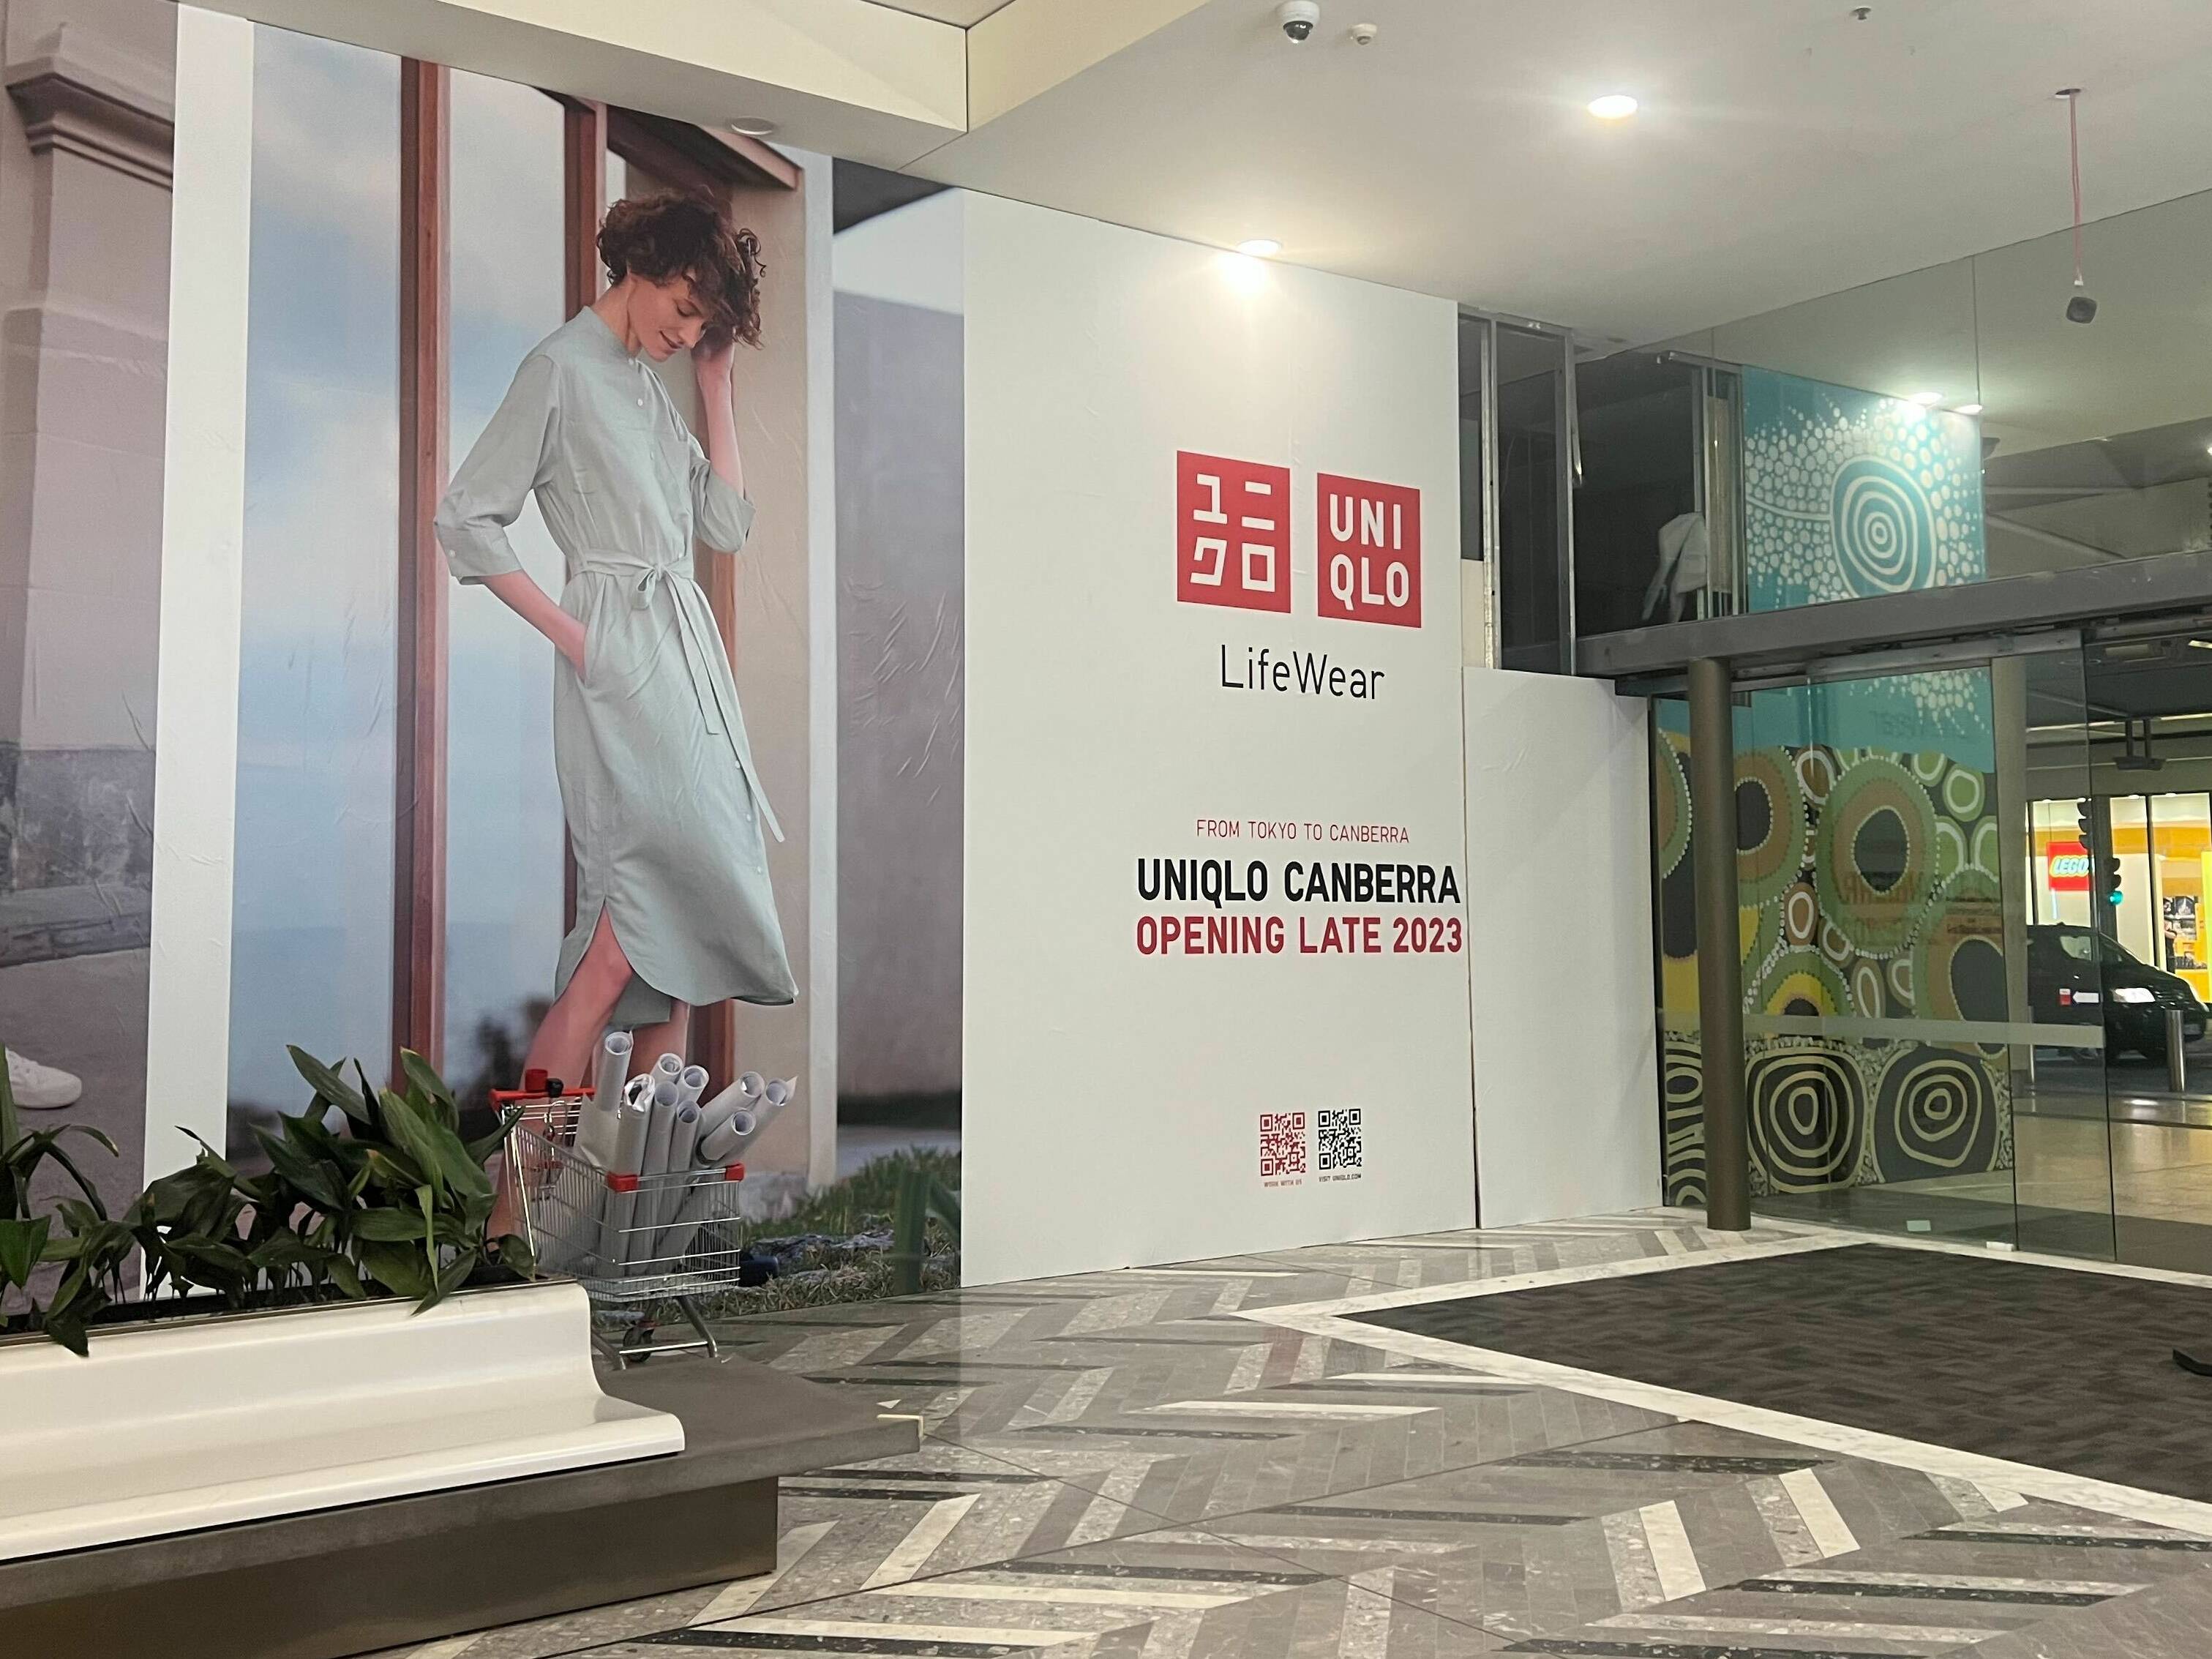 UNIQLO will open in the Canberra Centre late 2023  The Canberra Times   Canberra ACT